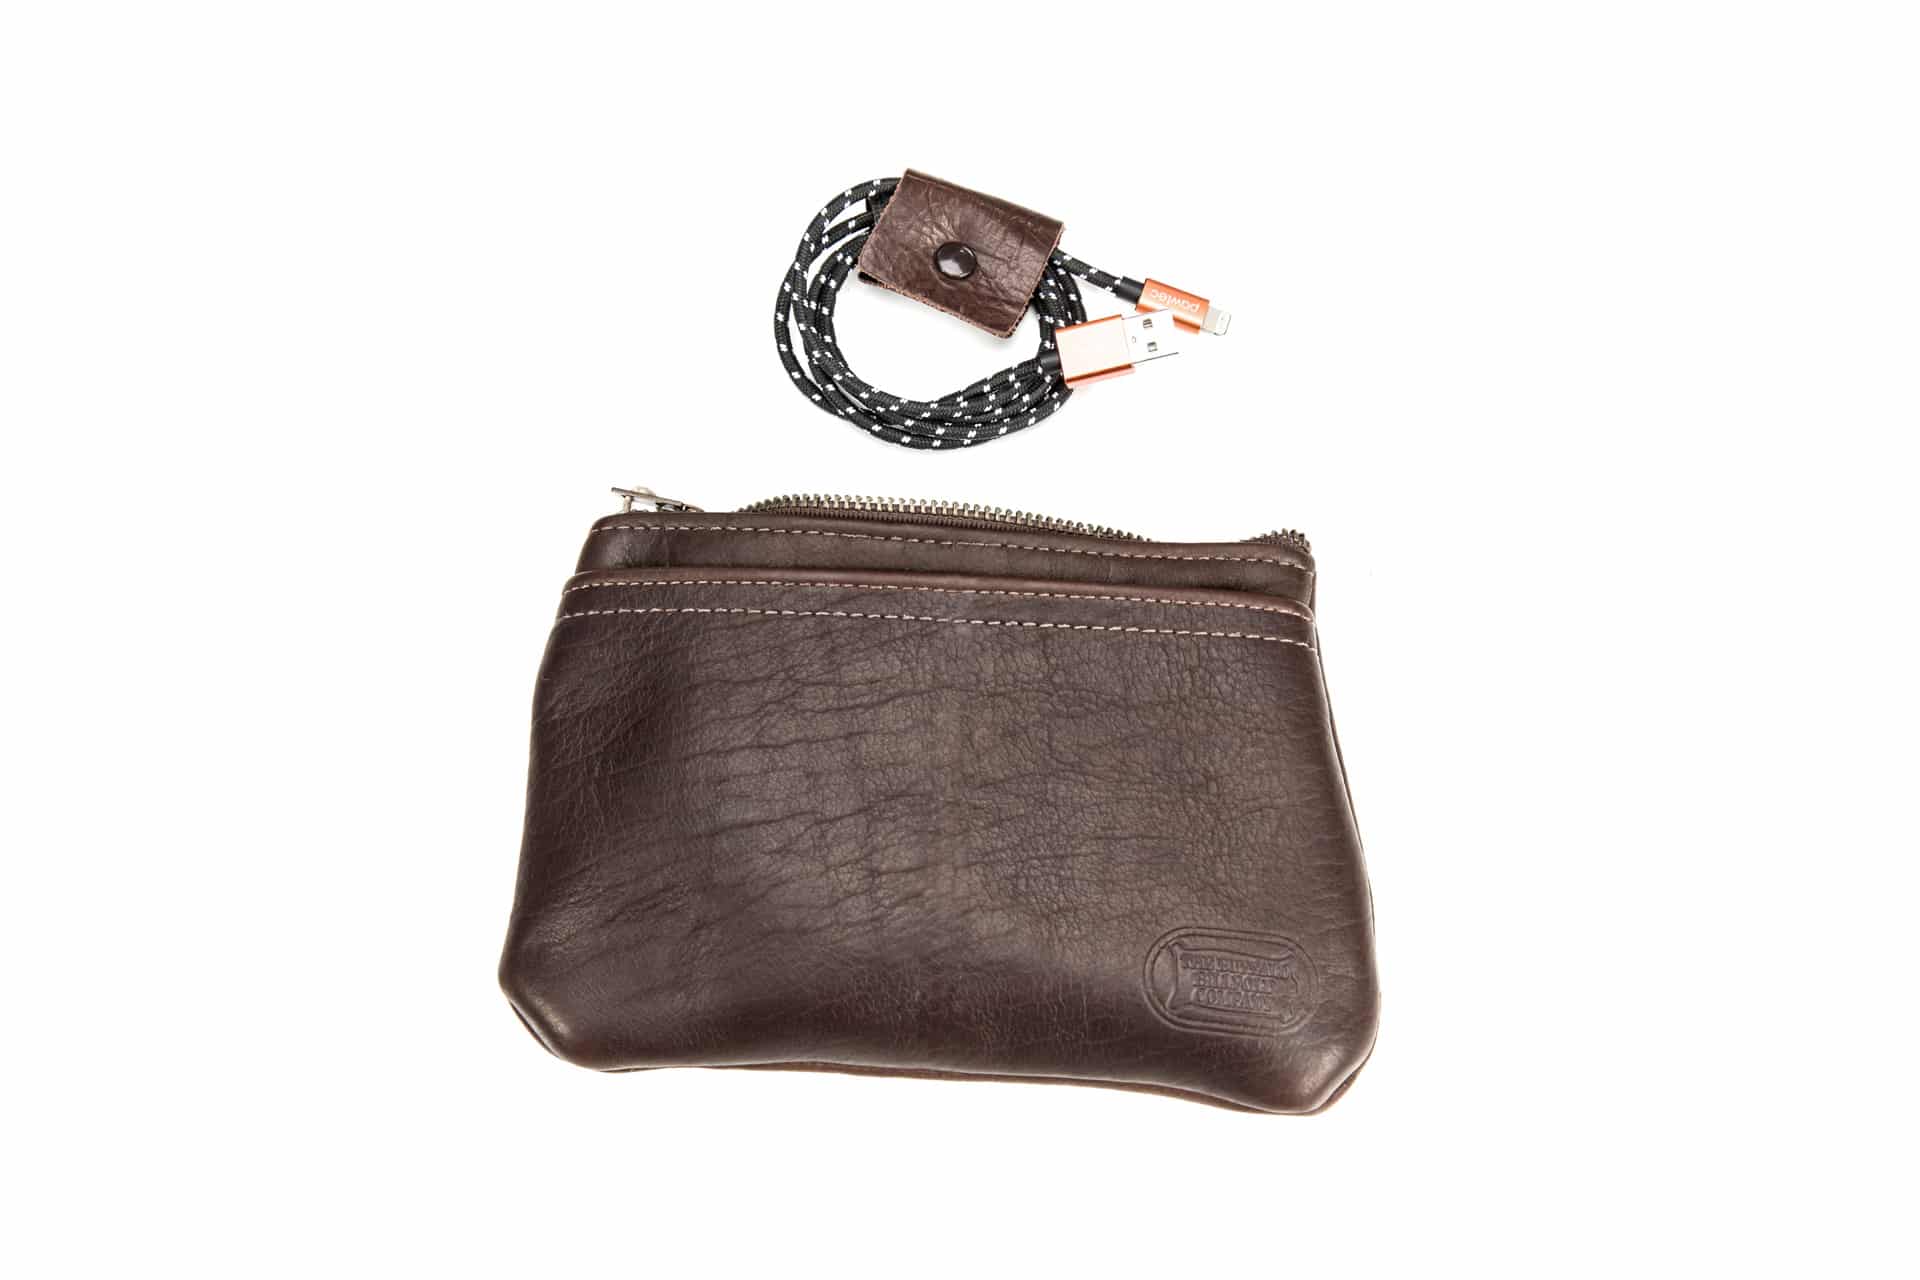 https://buffalobillfoldcompany.com/wp-content/uploads/2017/11/Leather-Tech-Pouch-Made-USA-Bison-Leather-BuffaloBillfoldCompany.jpg